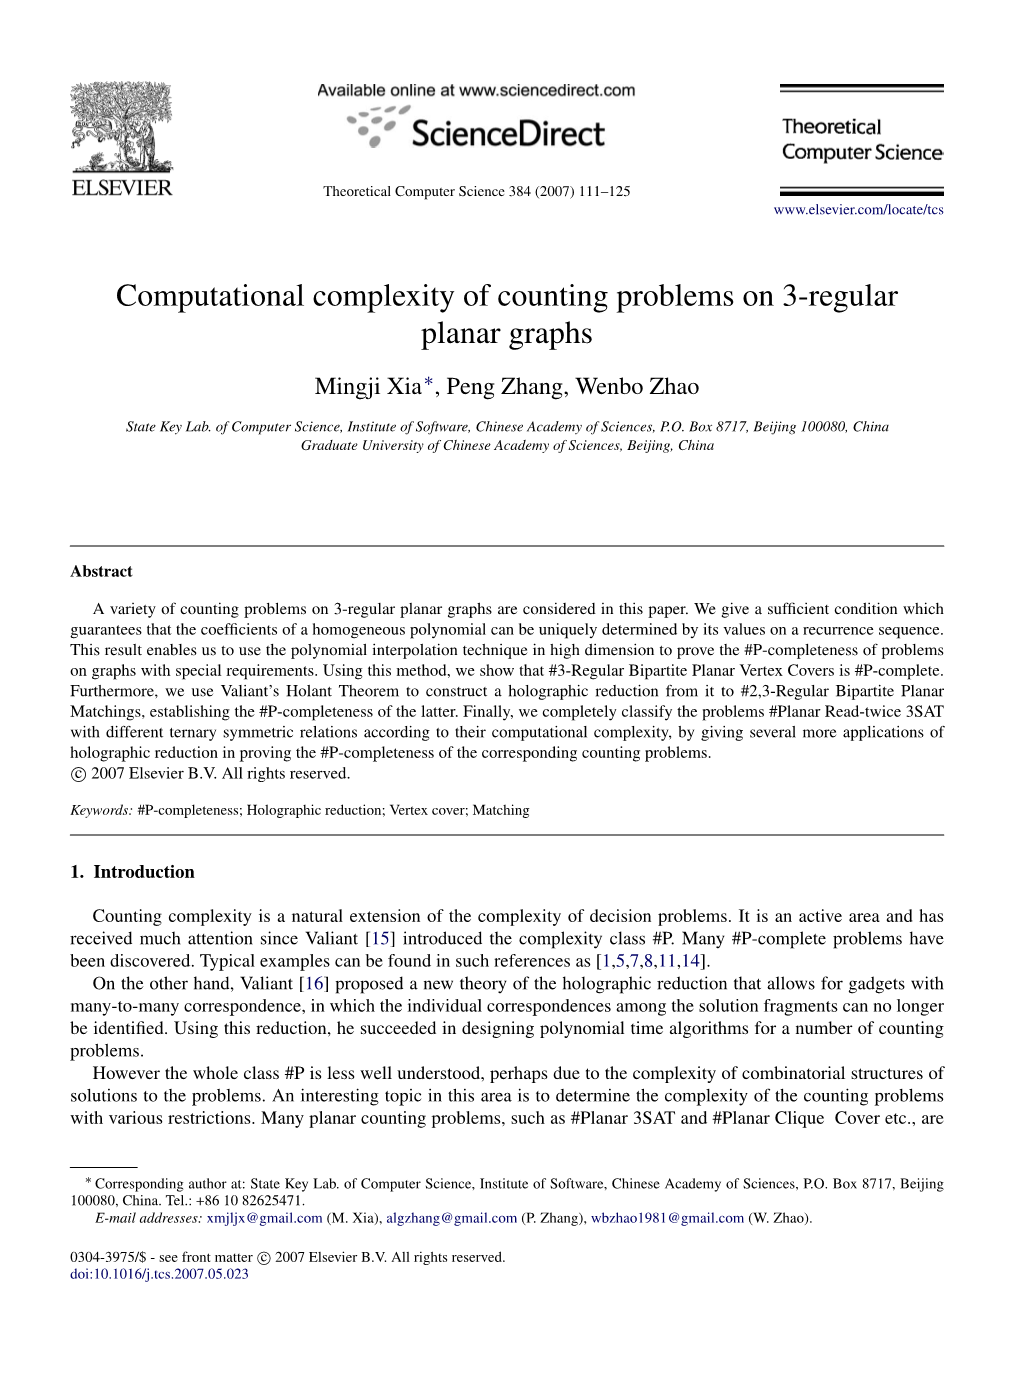 Computational Complexity of Counting Problems on 3-Regular Planar Graphs